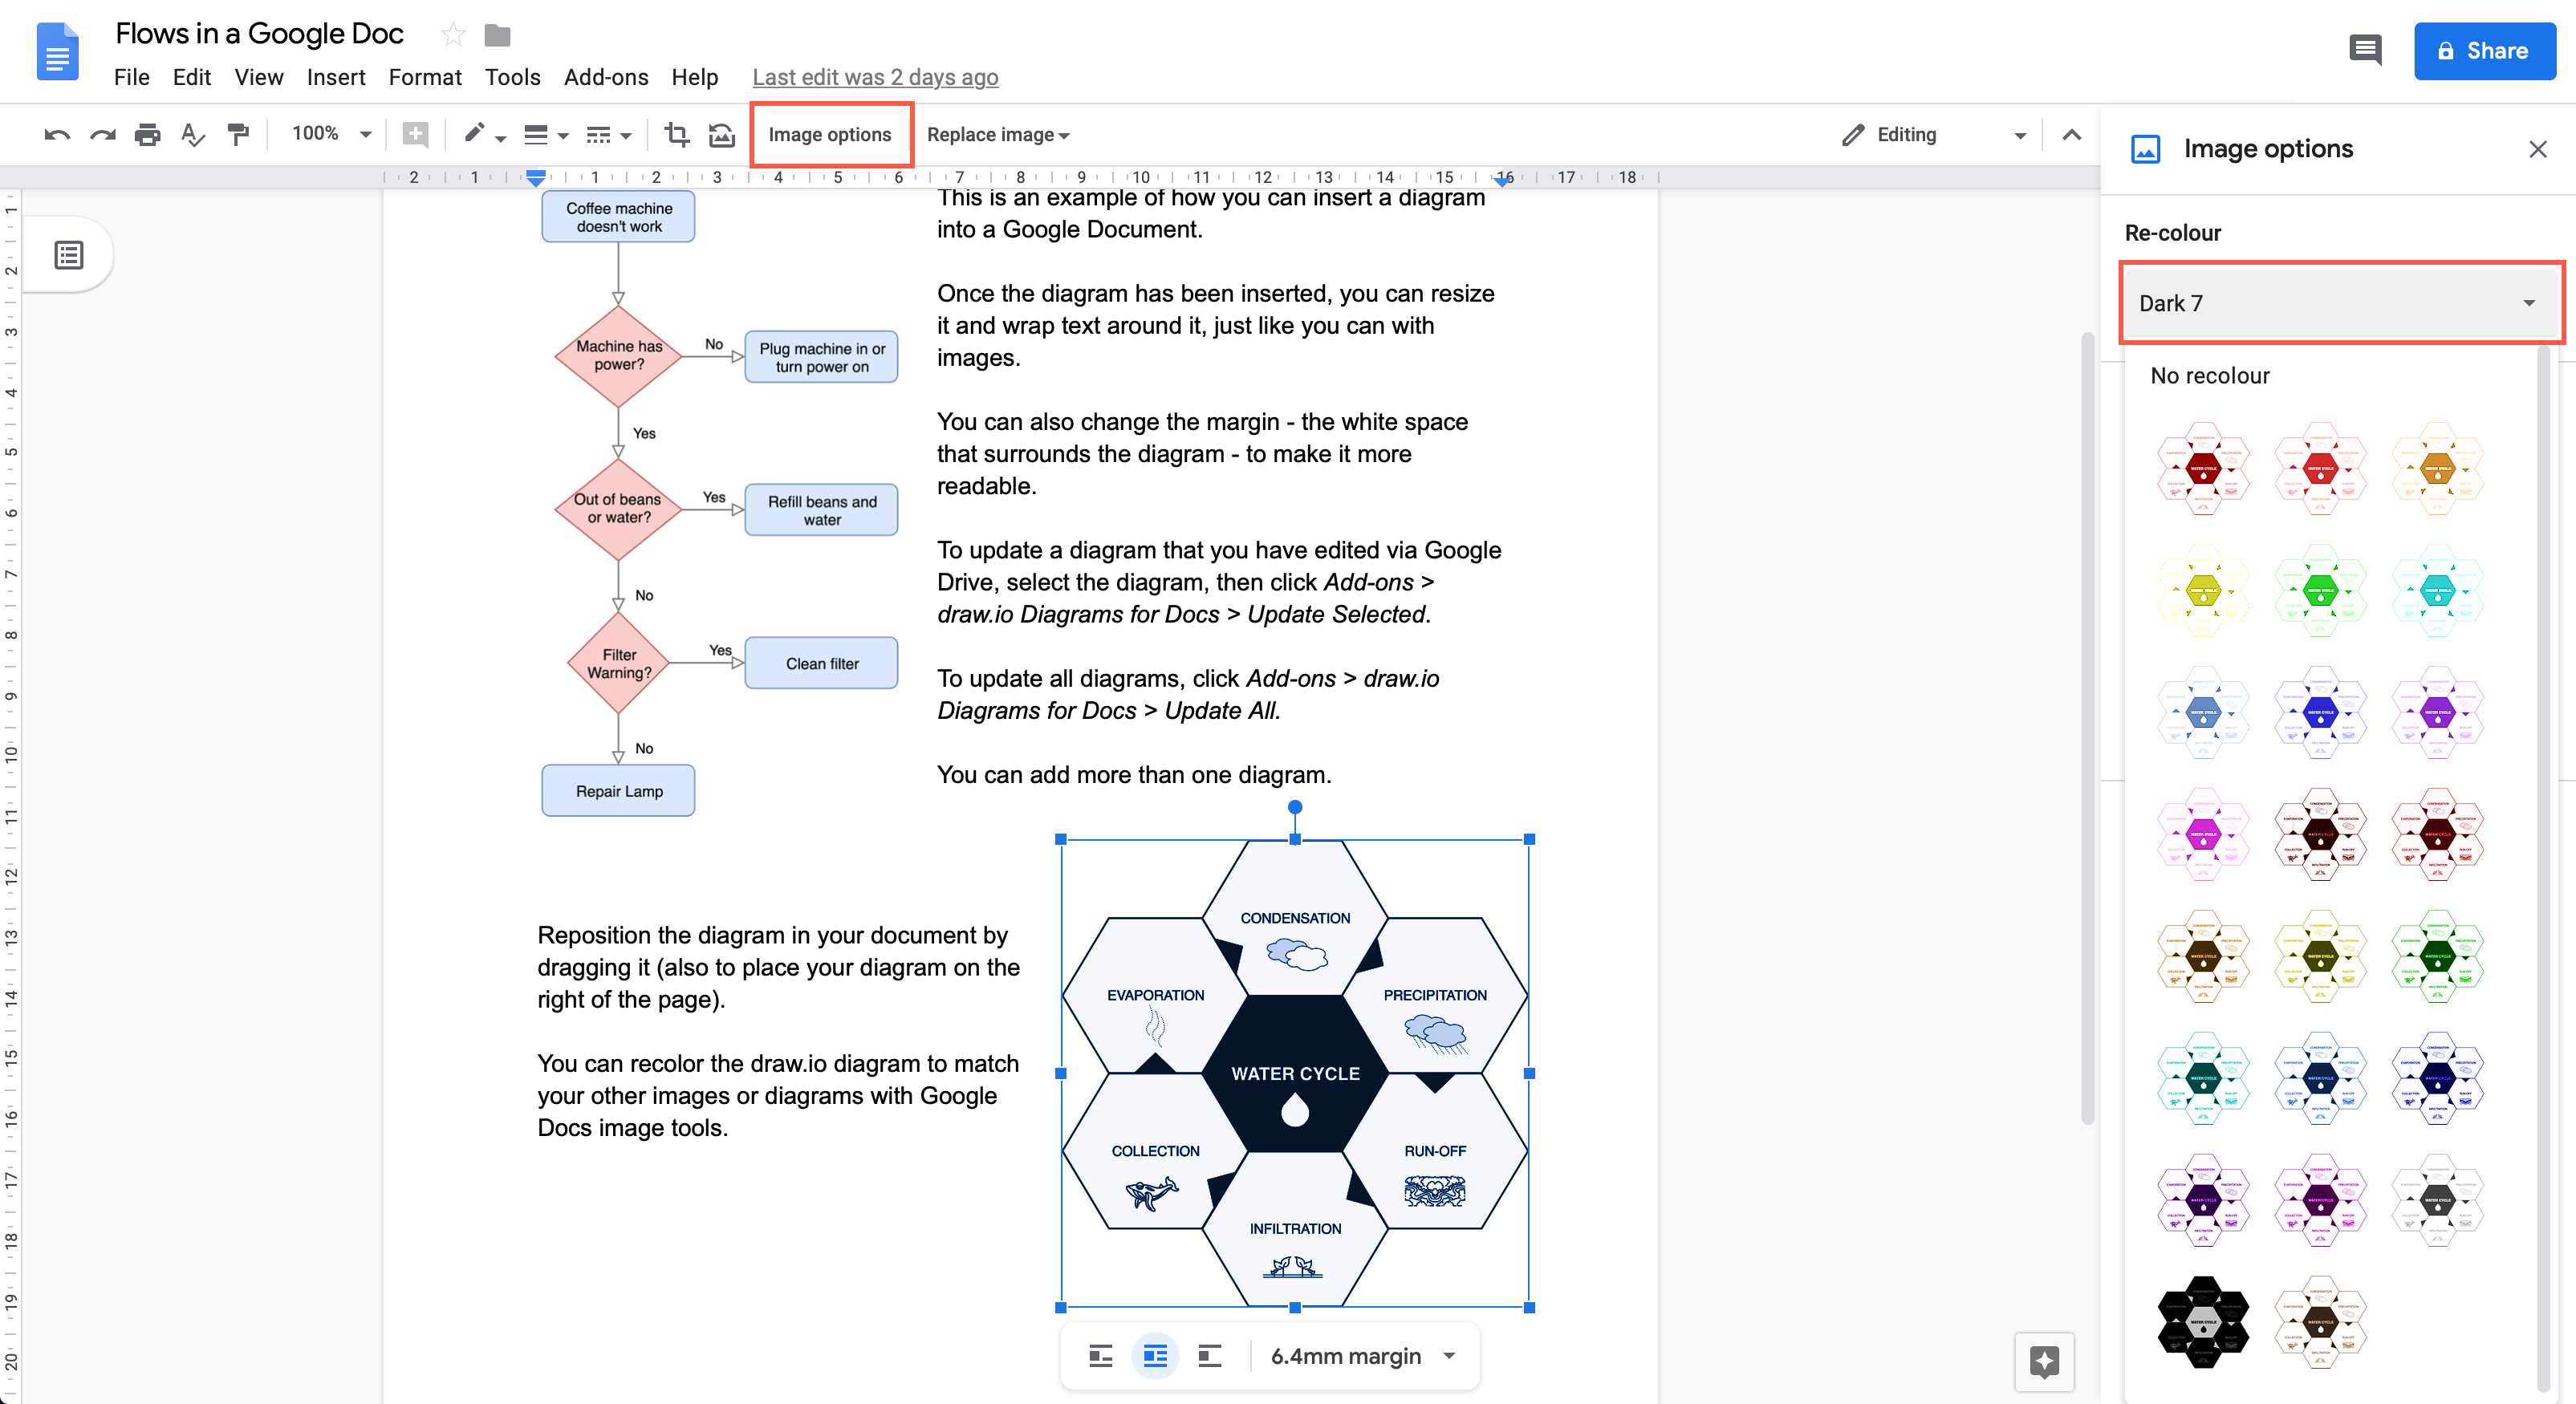 Apply a new colour filter to your diagram in your Google document